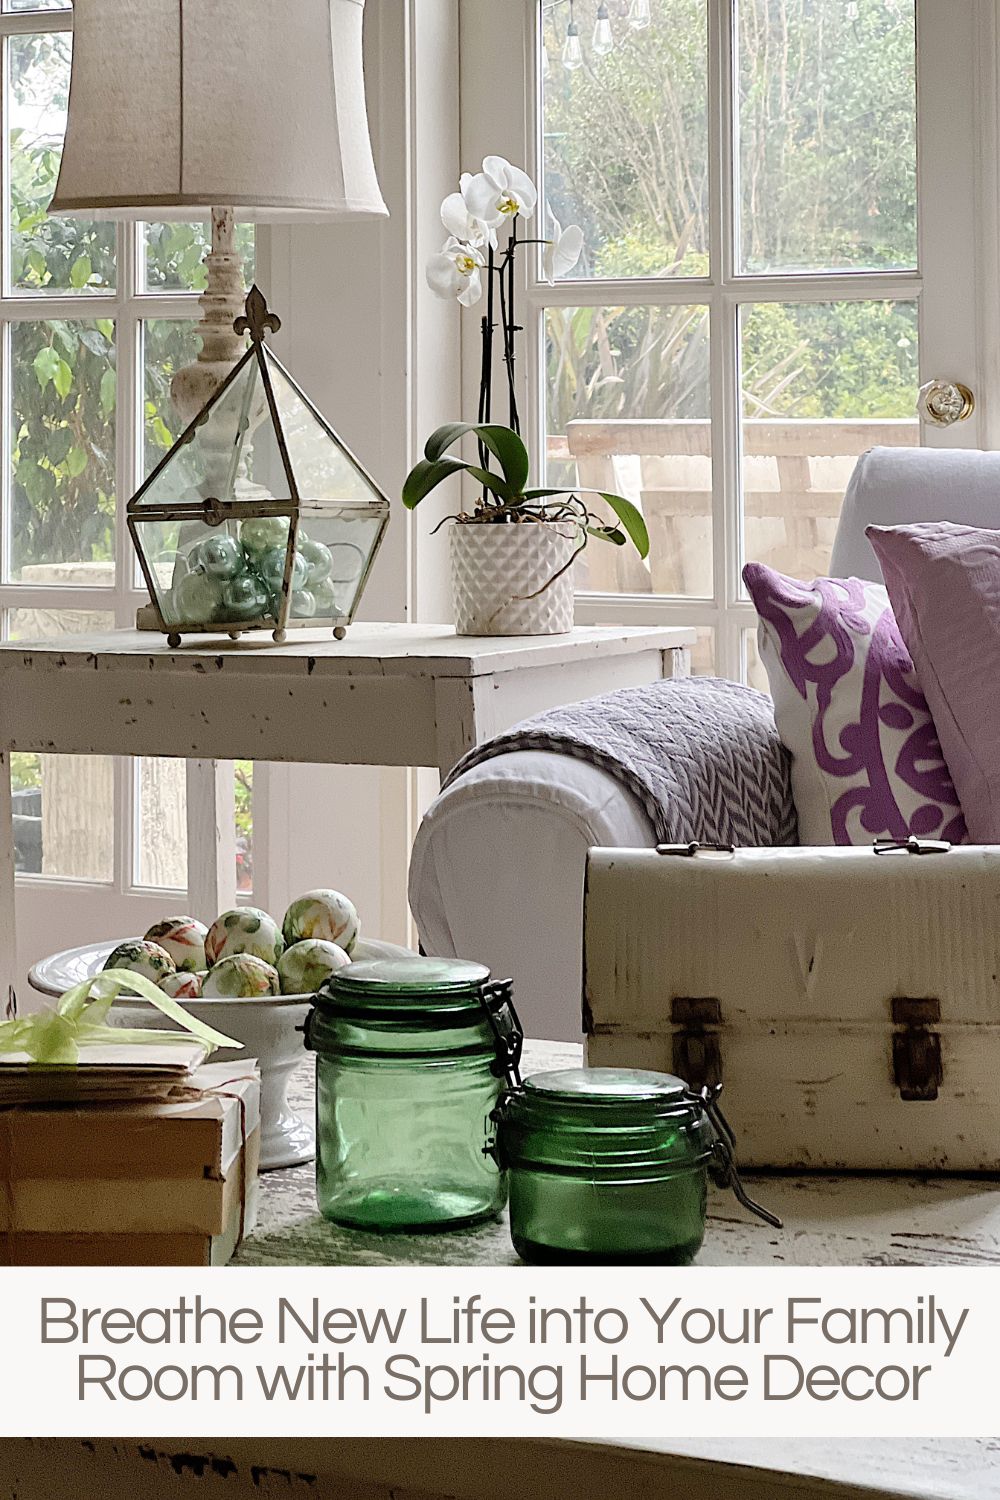 As winter recedes and we begin to see the colors and warmth of spring, it's time to refresh your living space with spring home decor.